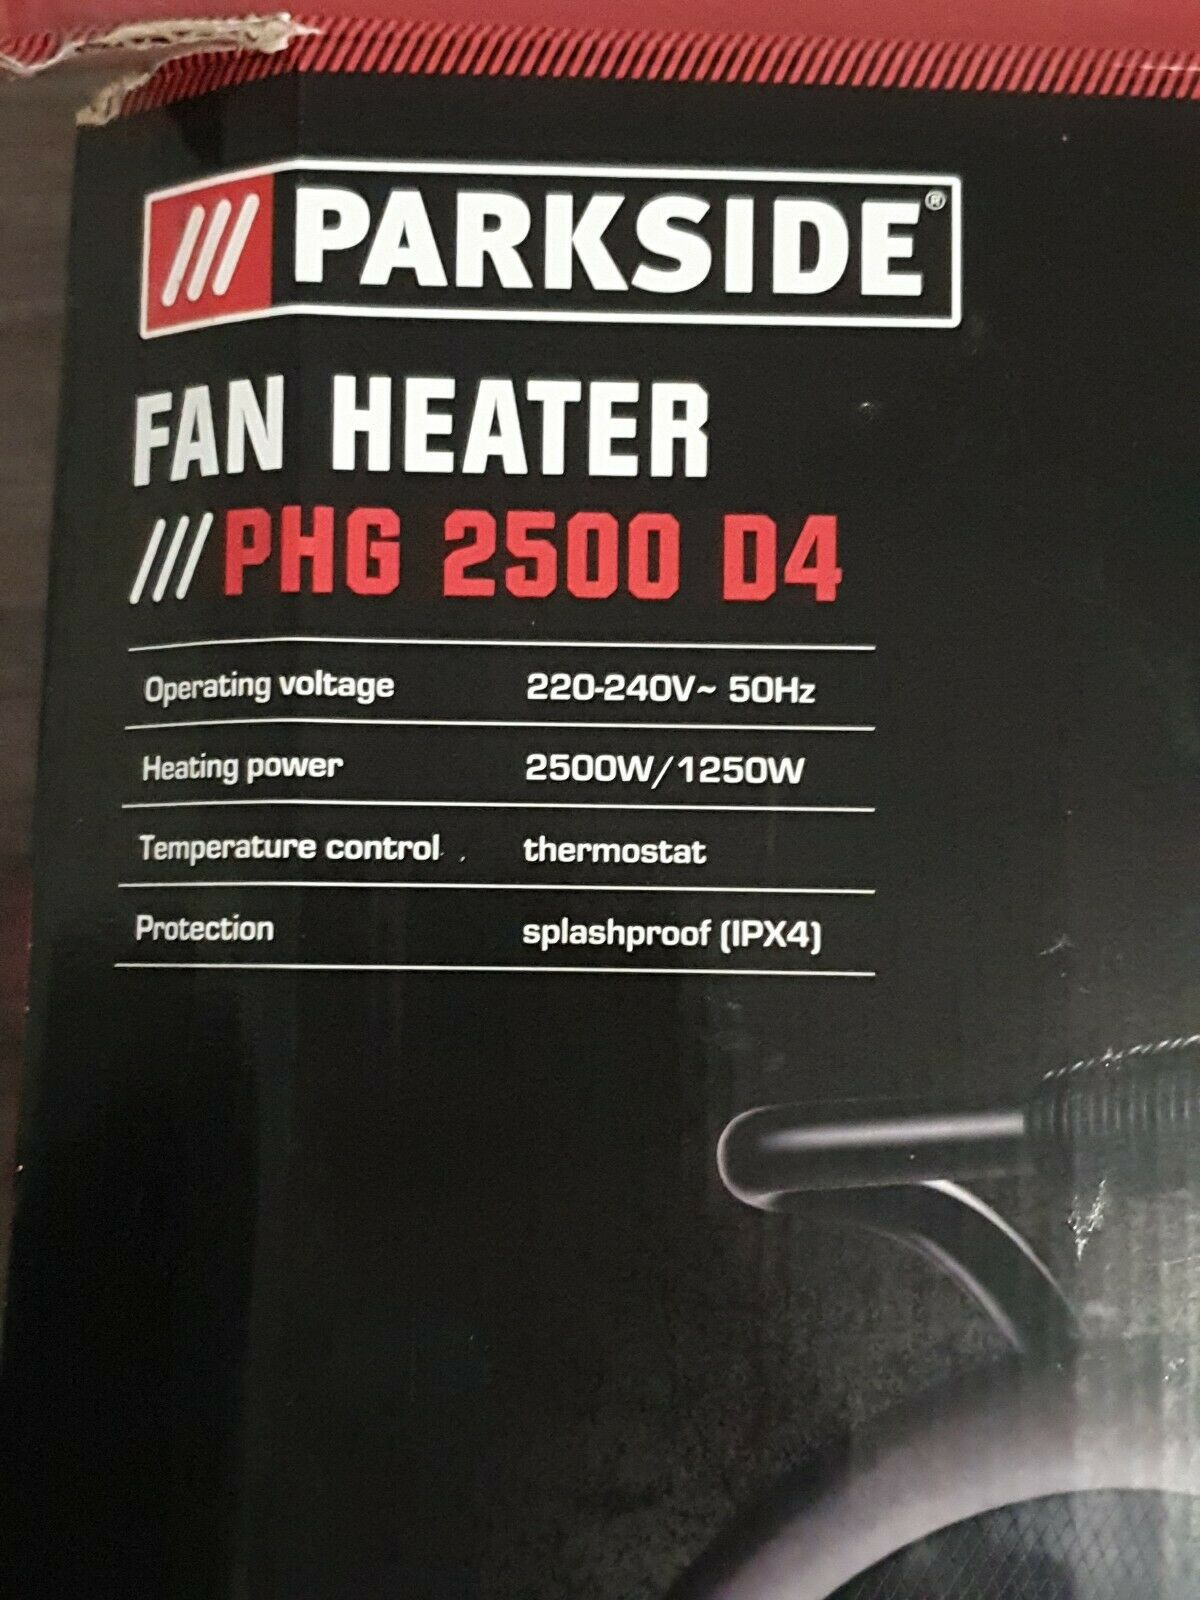 Parkside Very Large Powerful 2500w Fan Heater Phg 2500 D4 With Climate Control within size 1200 X 1600